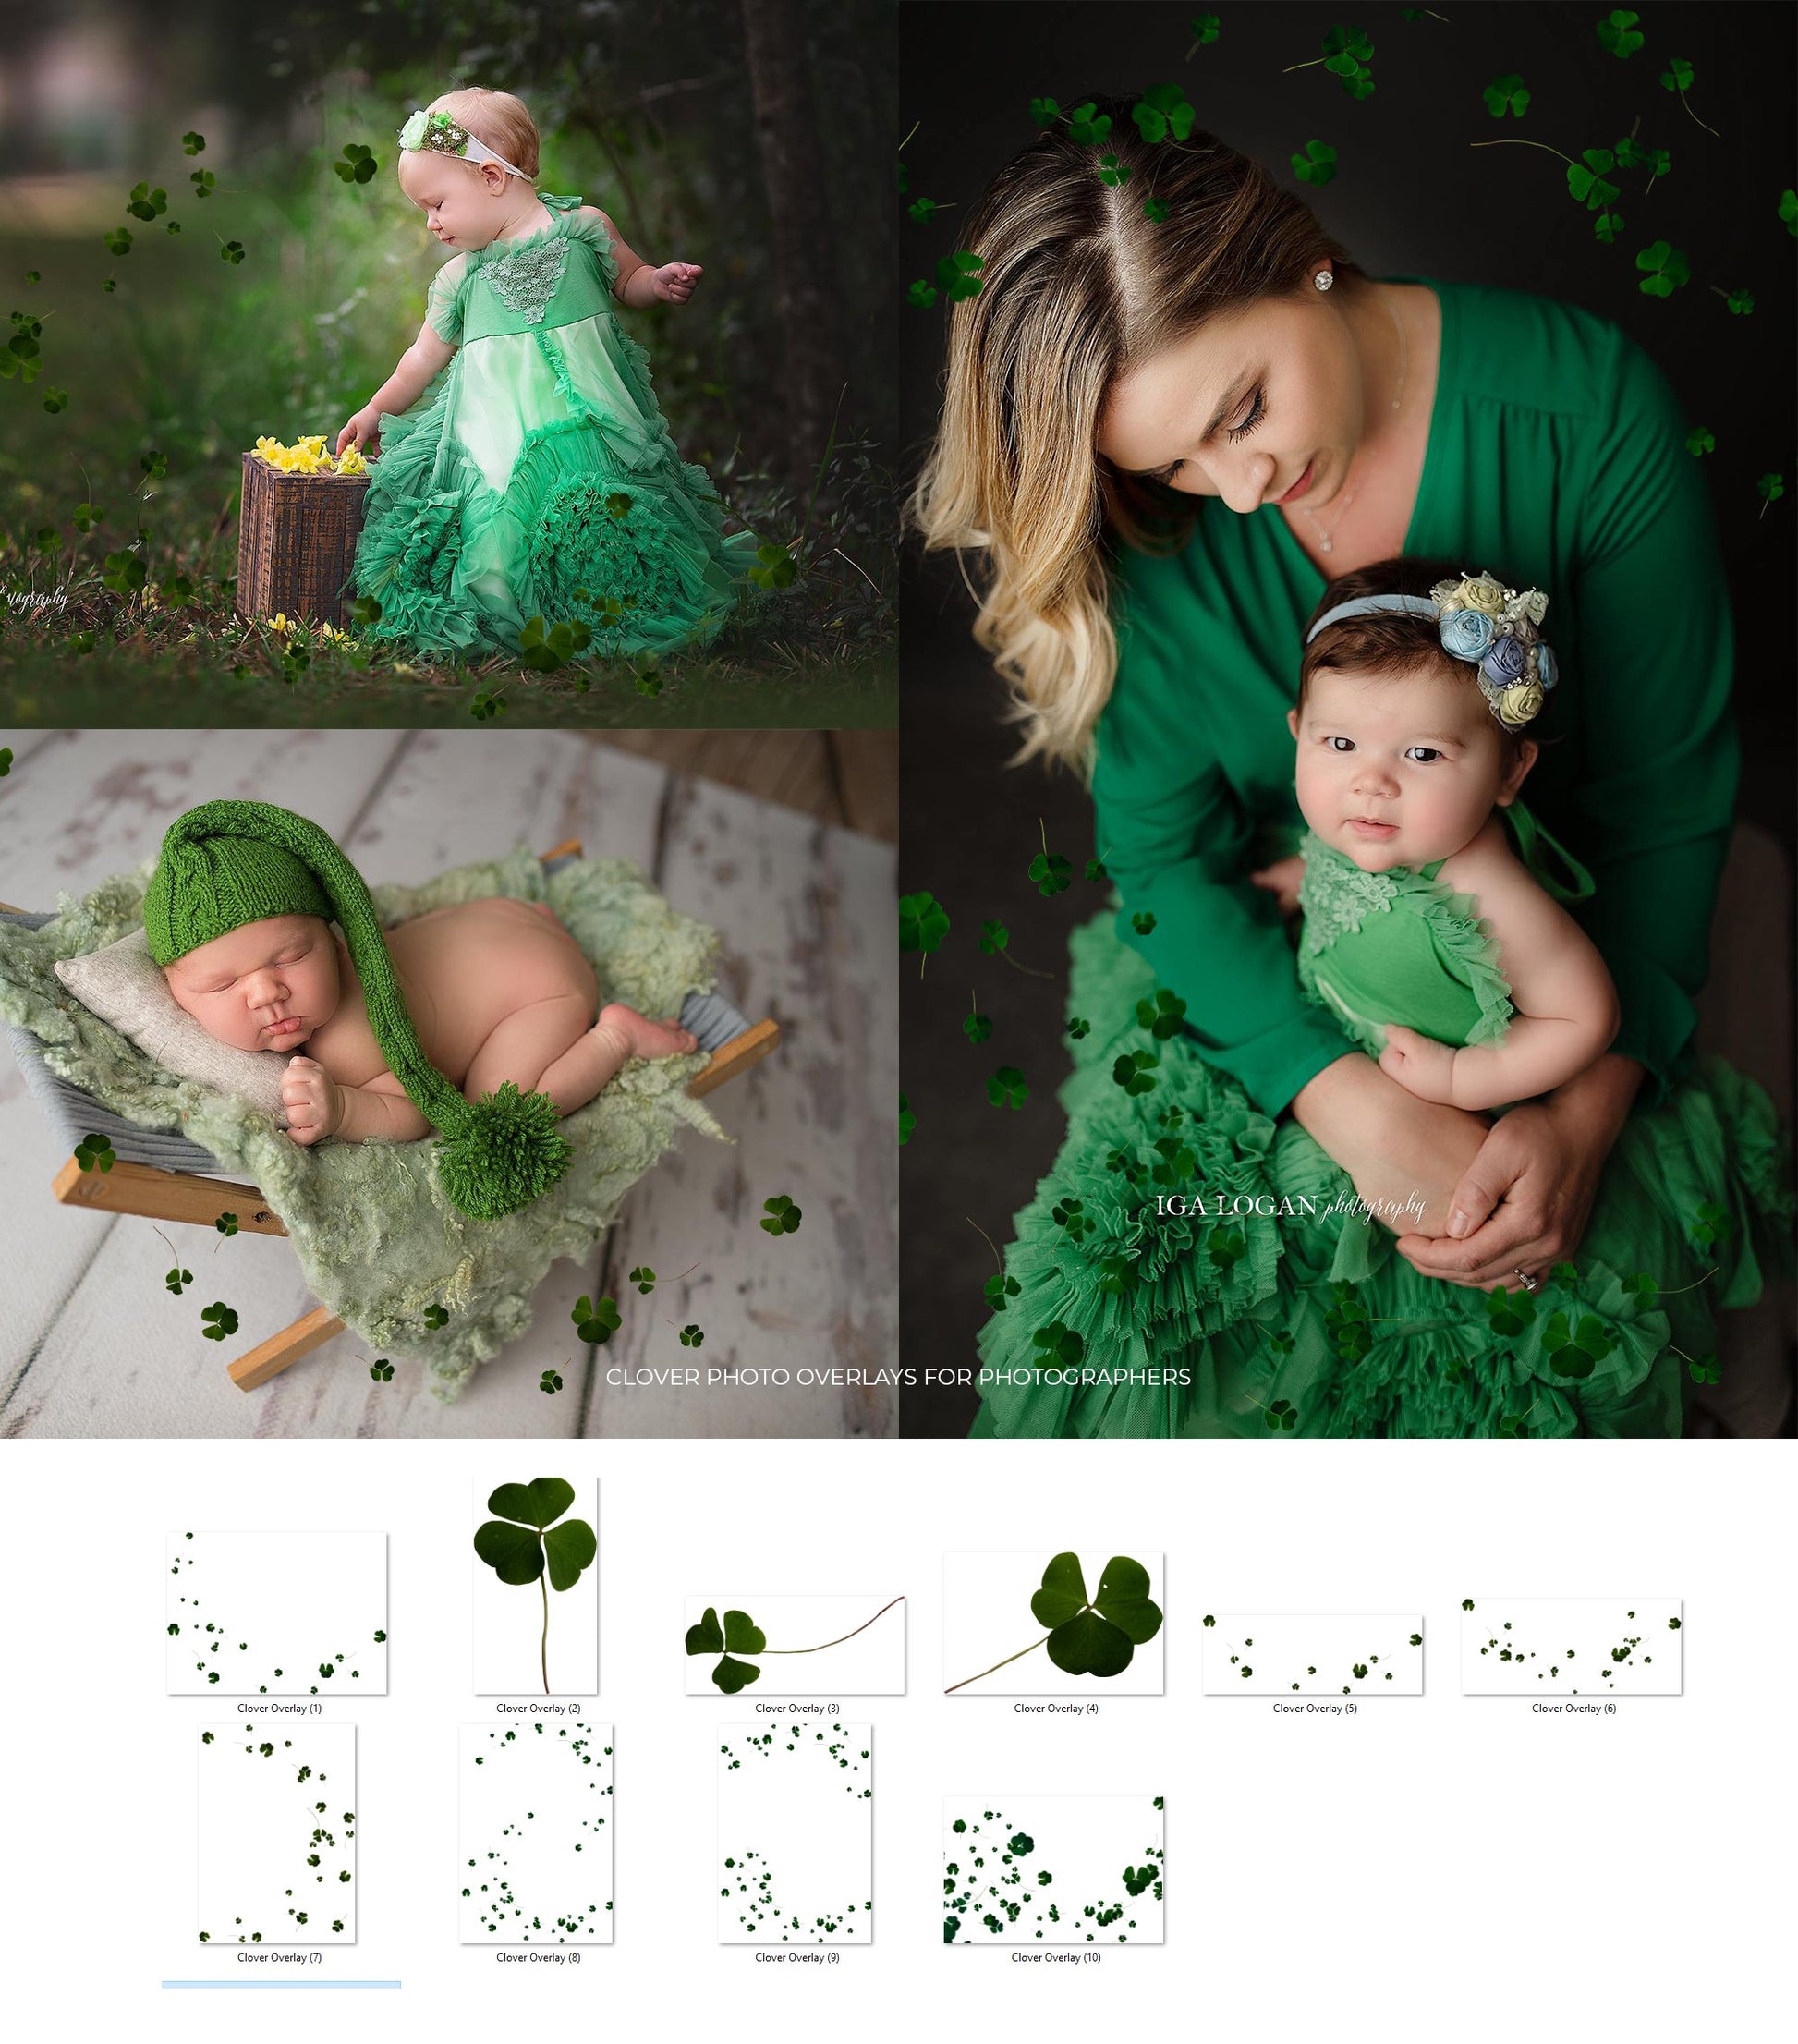 Clover Photo Overlays for Photographers - Photoshop Overlays, Digital Backgrounds and Lightroom Presets